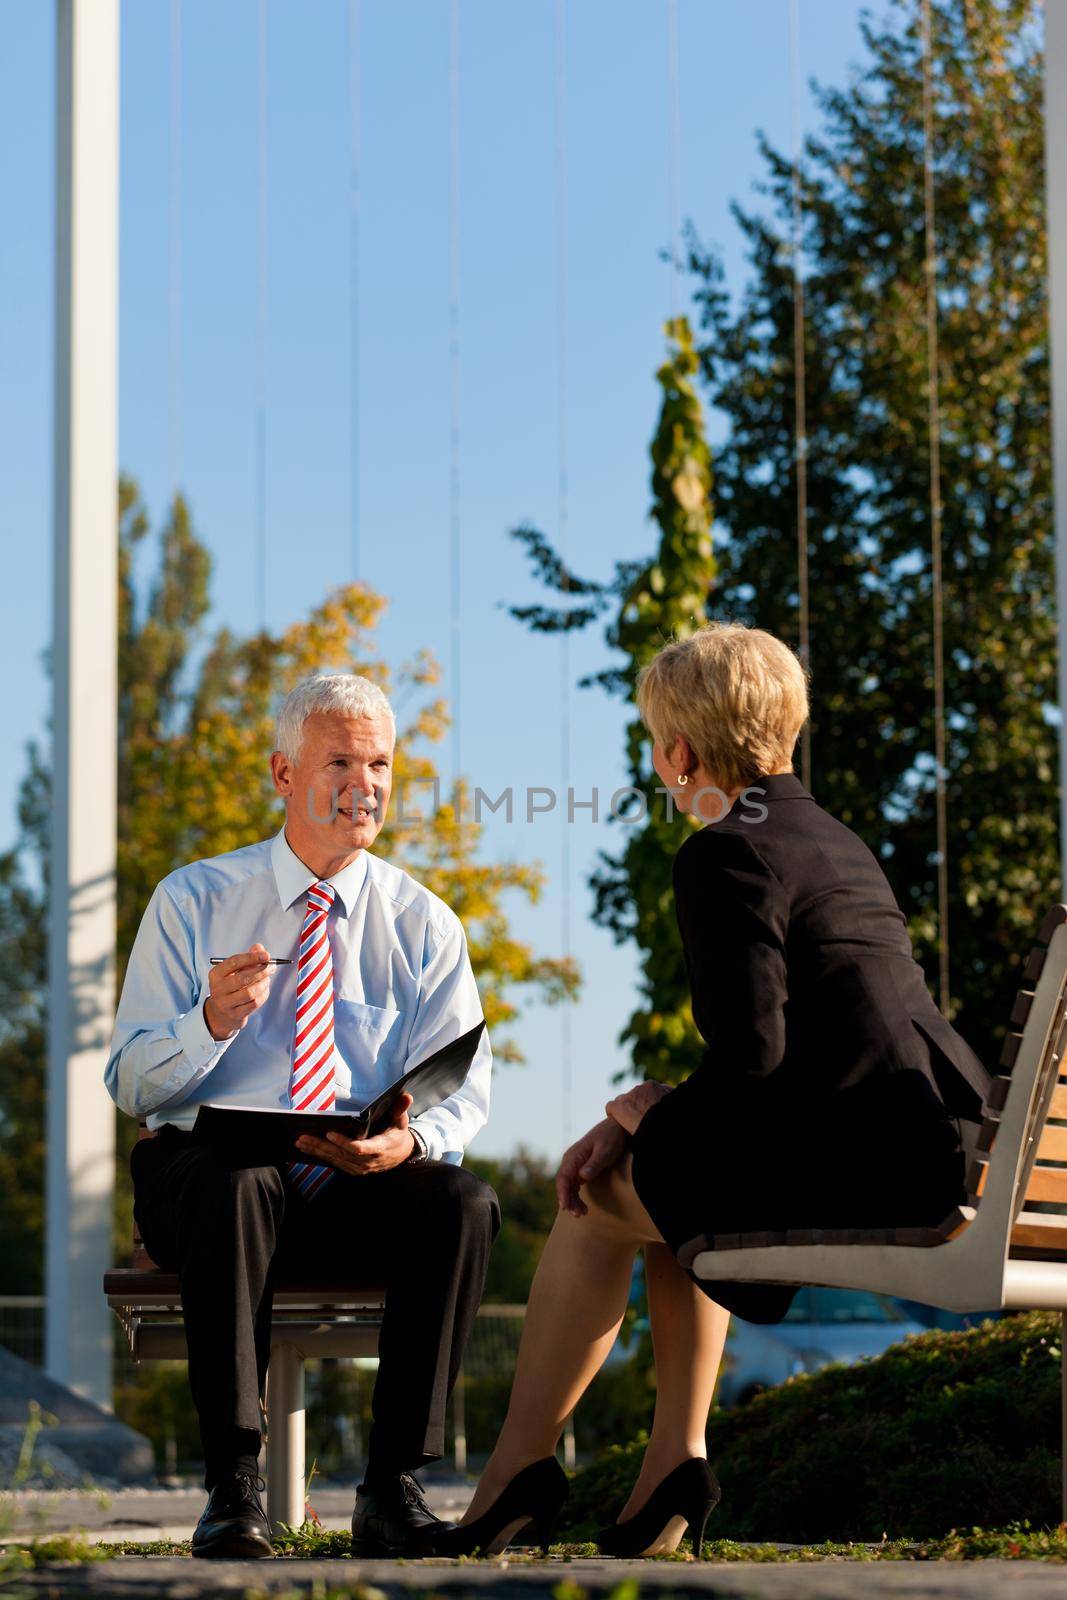 Business Coaching outdoors - man and woman in coaching discussion